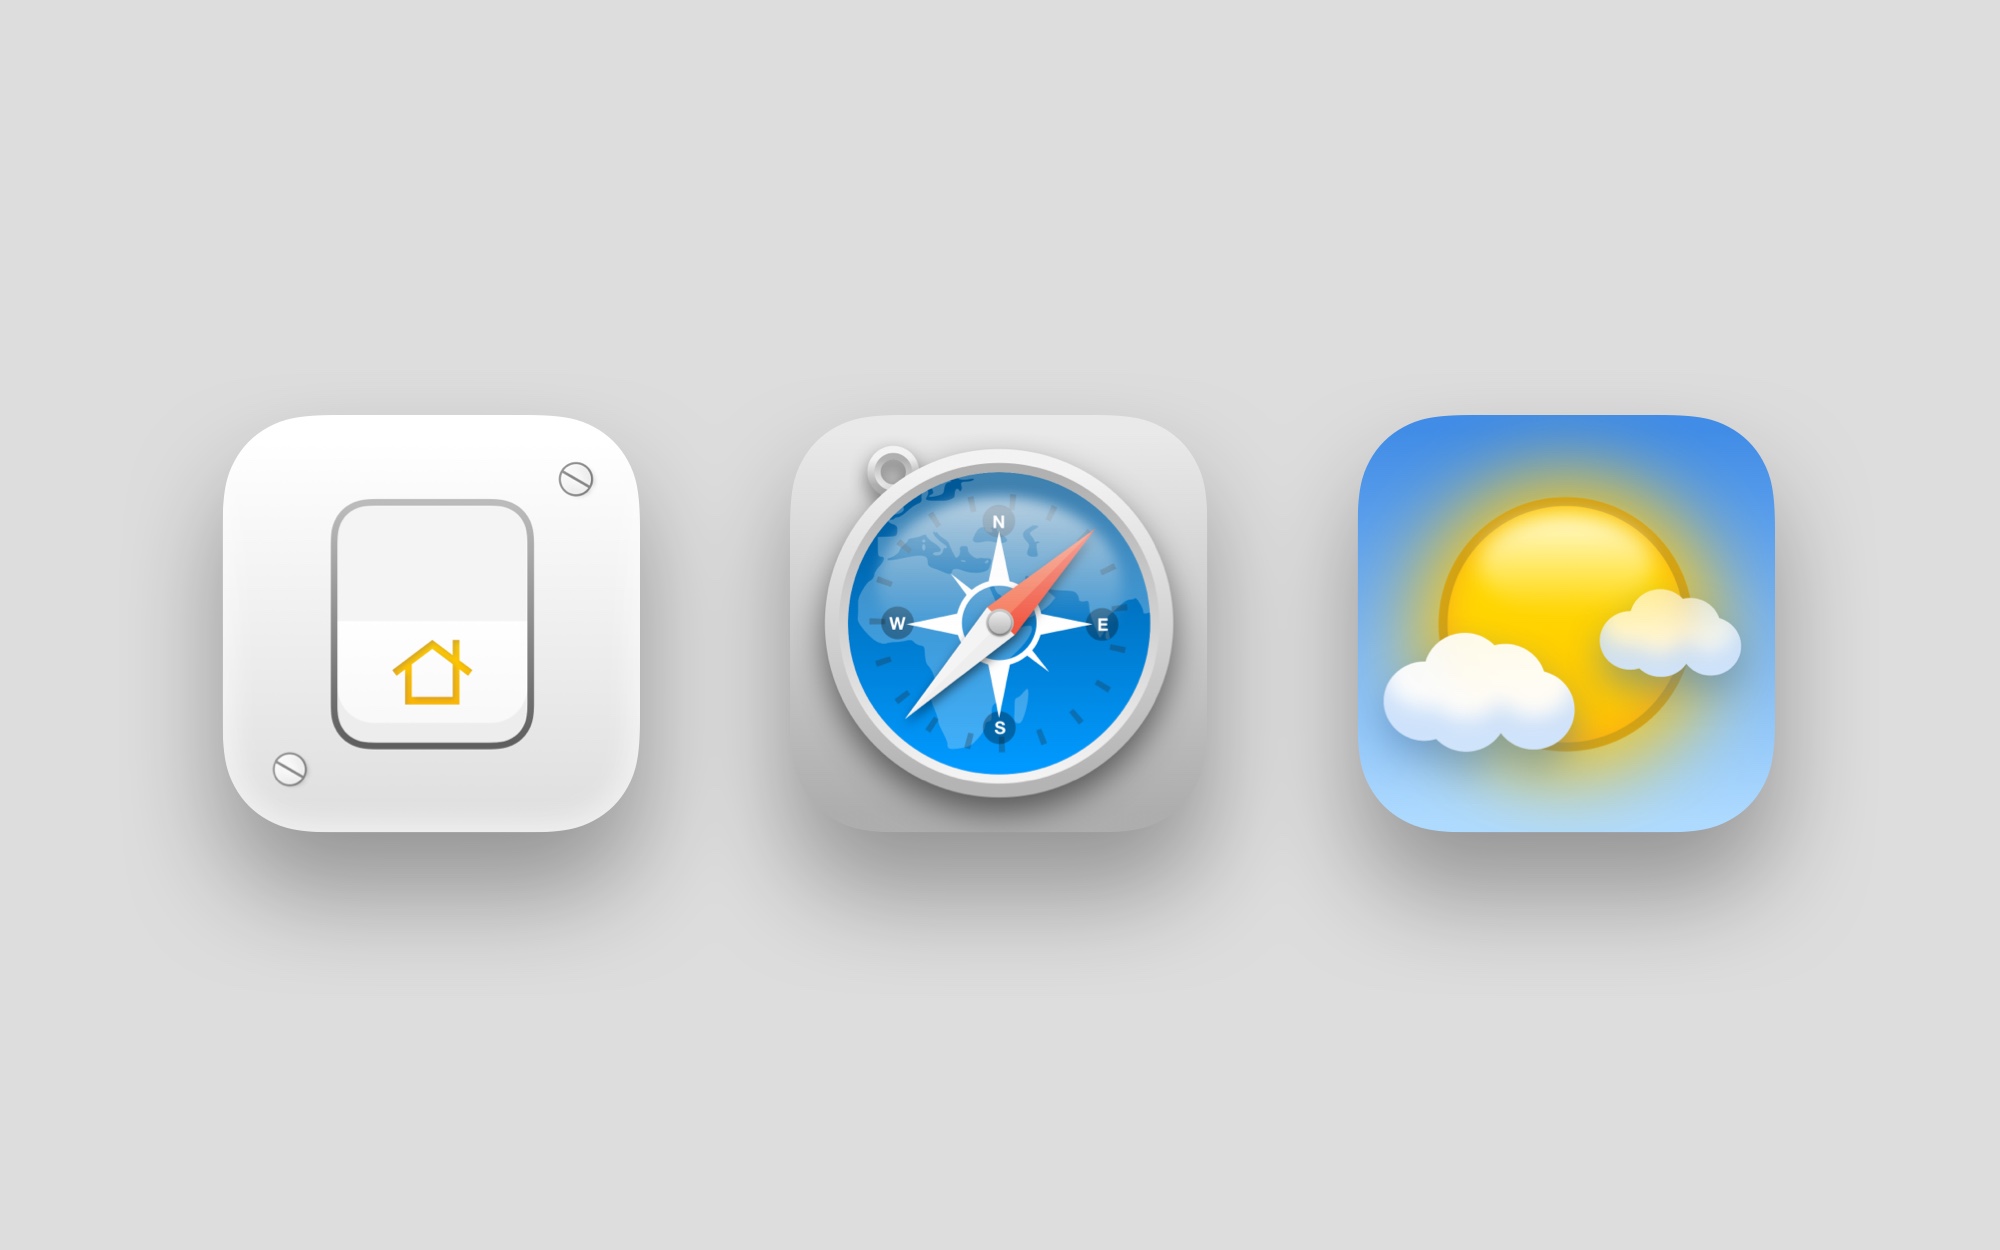 The Textured icon theme takes inspiration from real world objects to describe app icons.